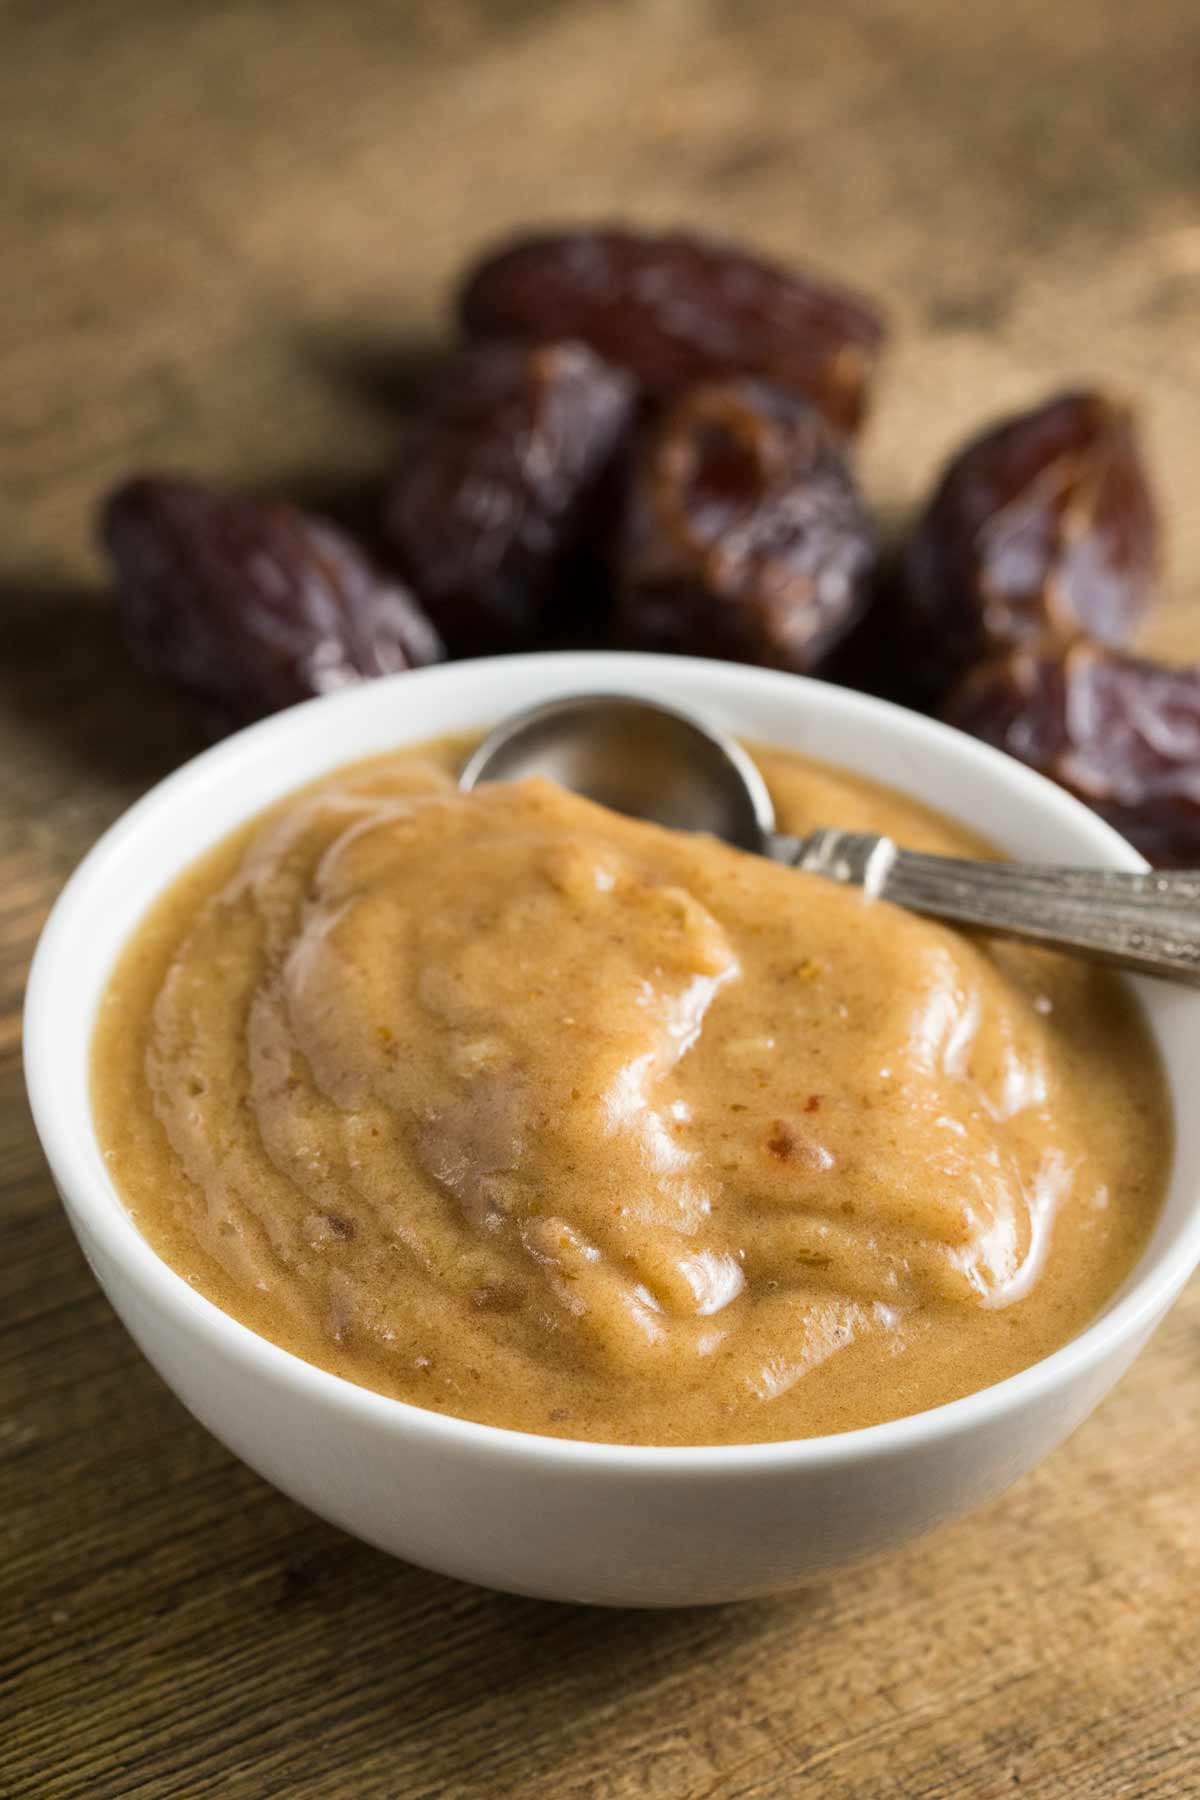 Date paste in a white bowl with a spoon.